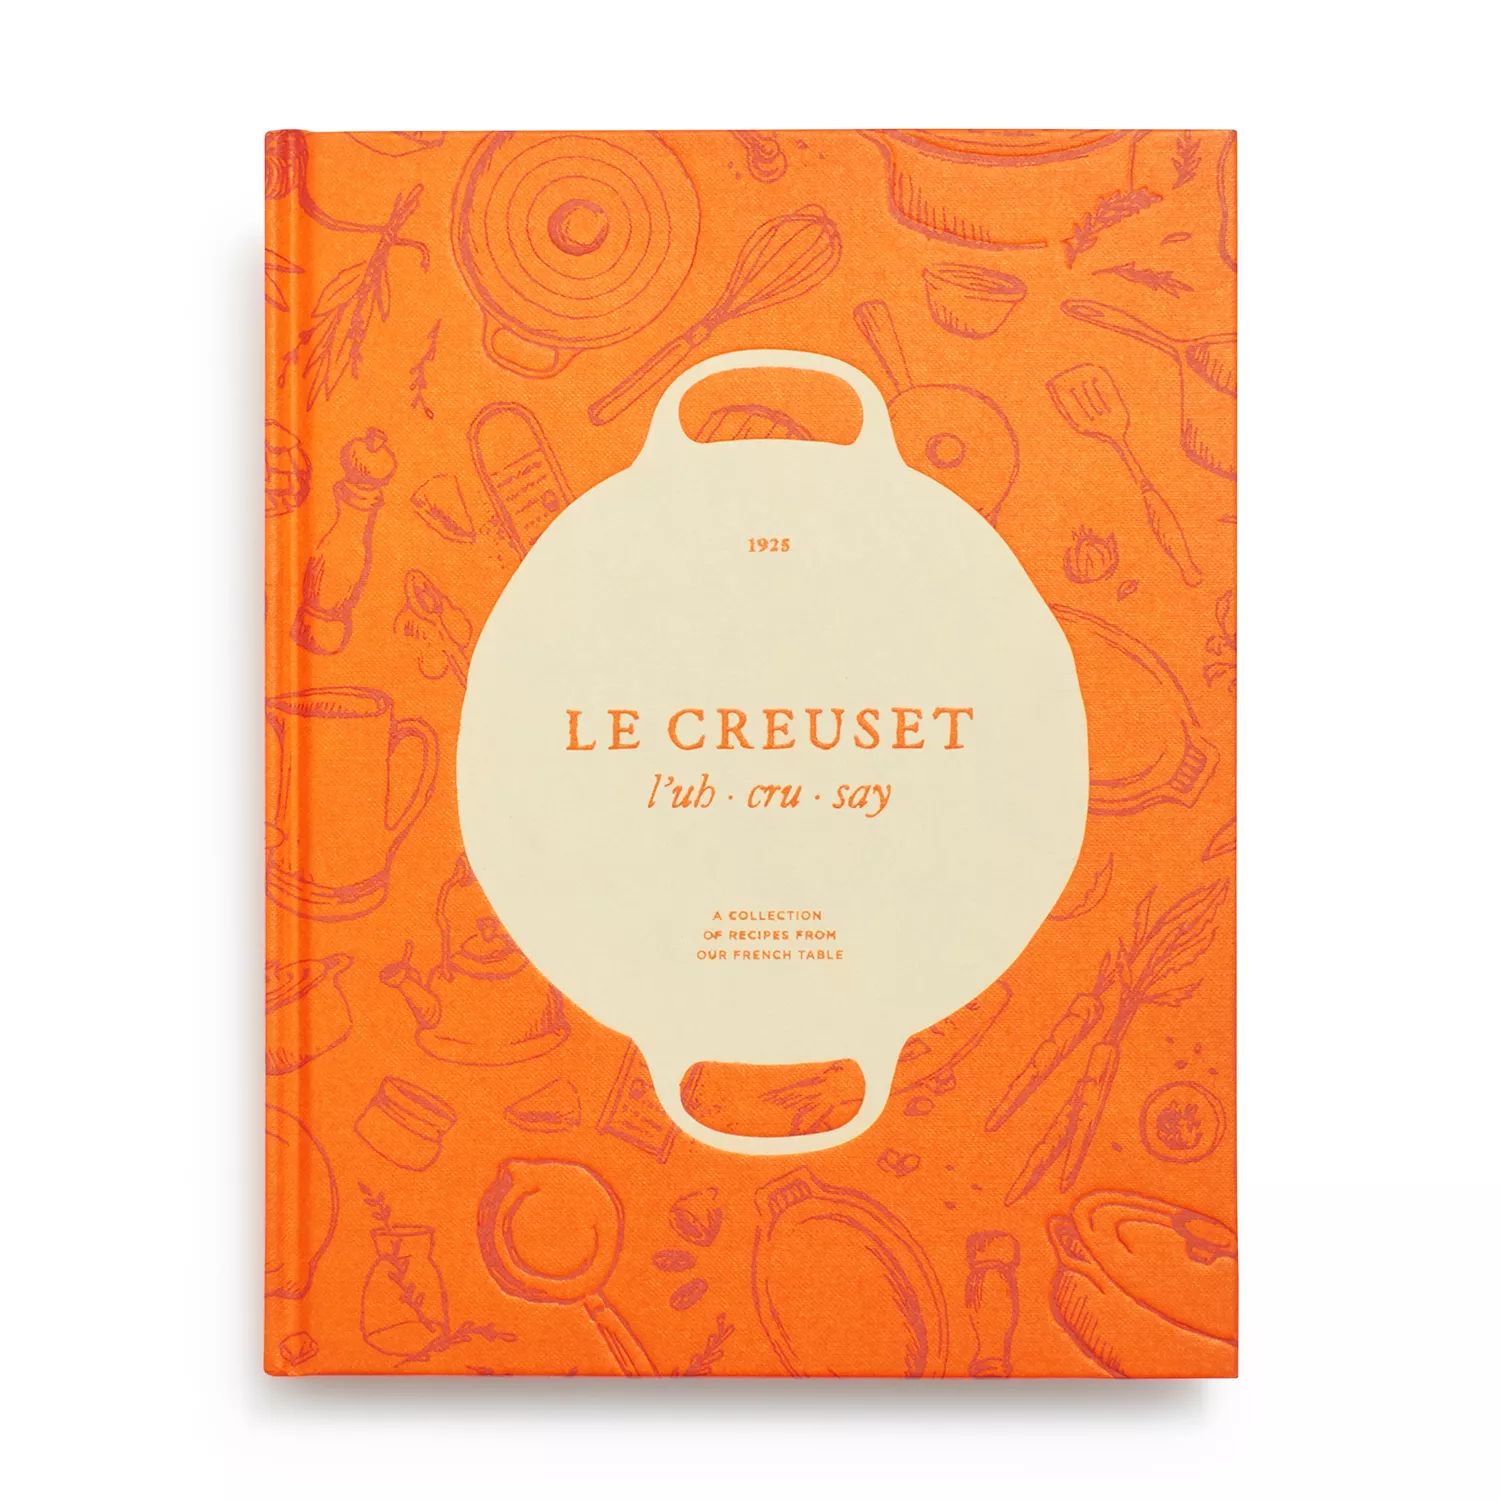 Le Creuset Cookbook: A Collection of Recipes from Our French Table | Sur La Table | Sur La Table